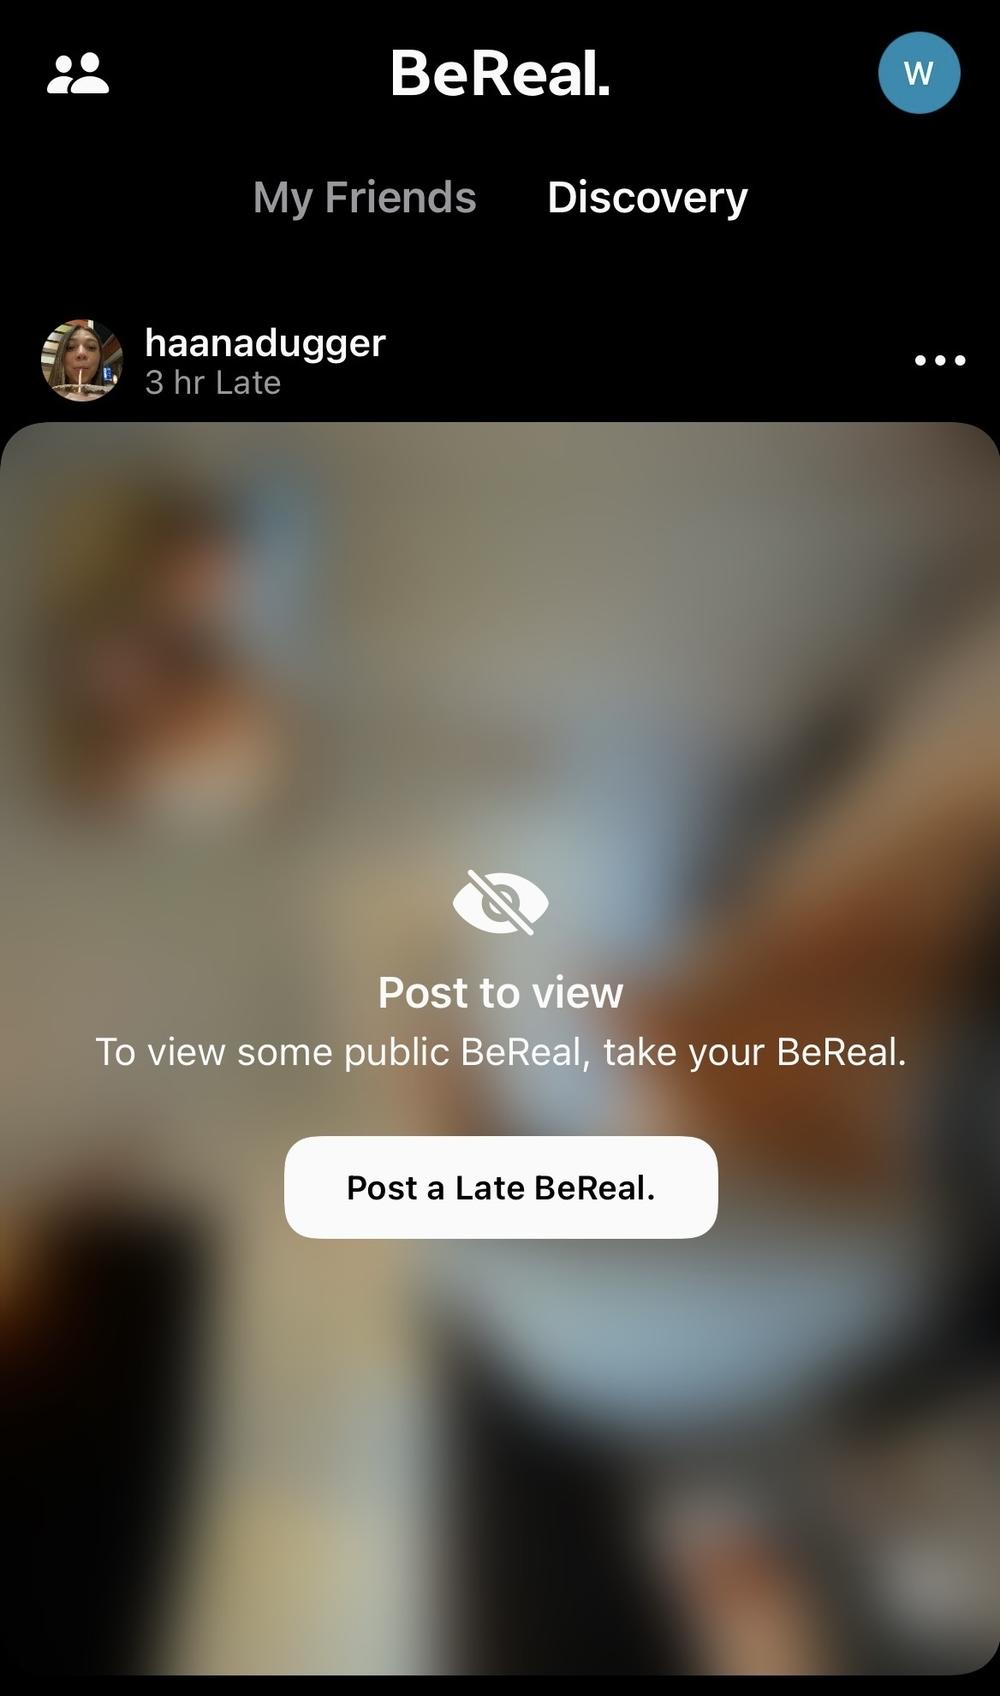 BeReal encourages participation by asking users to share content before they can view other people's posts.